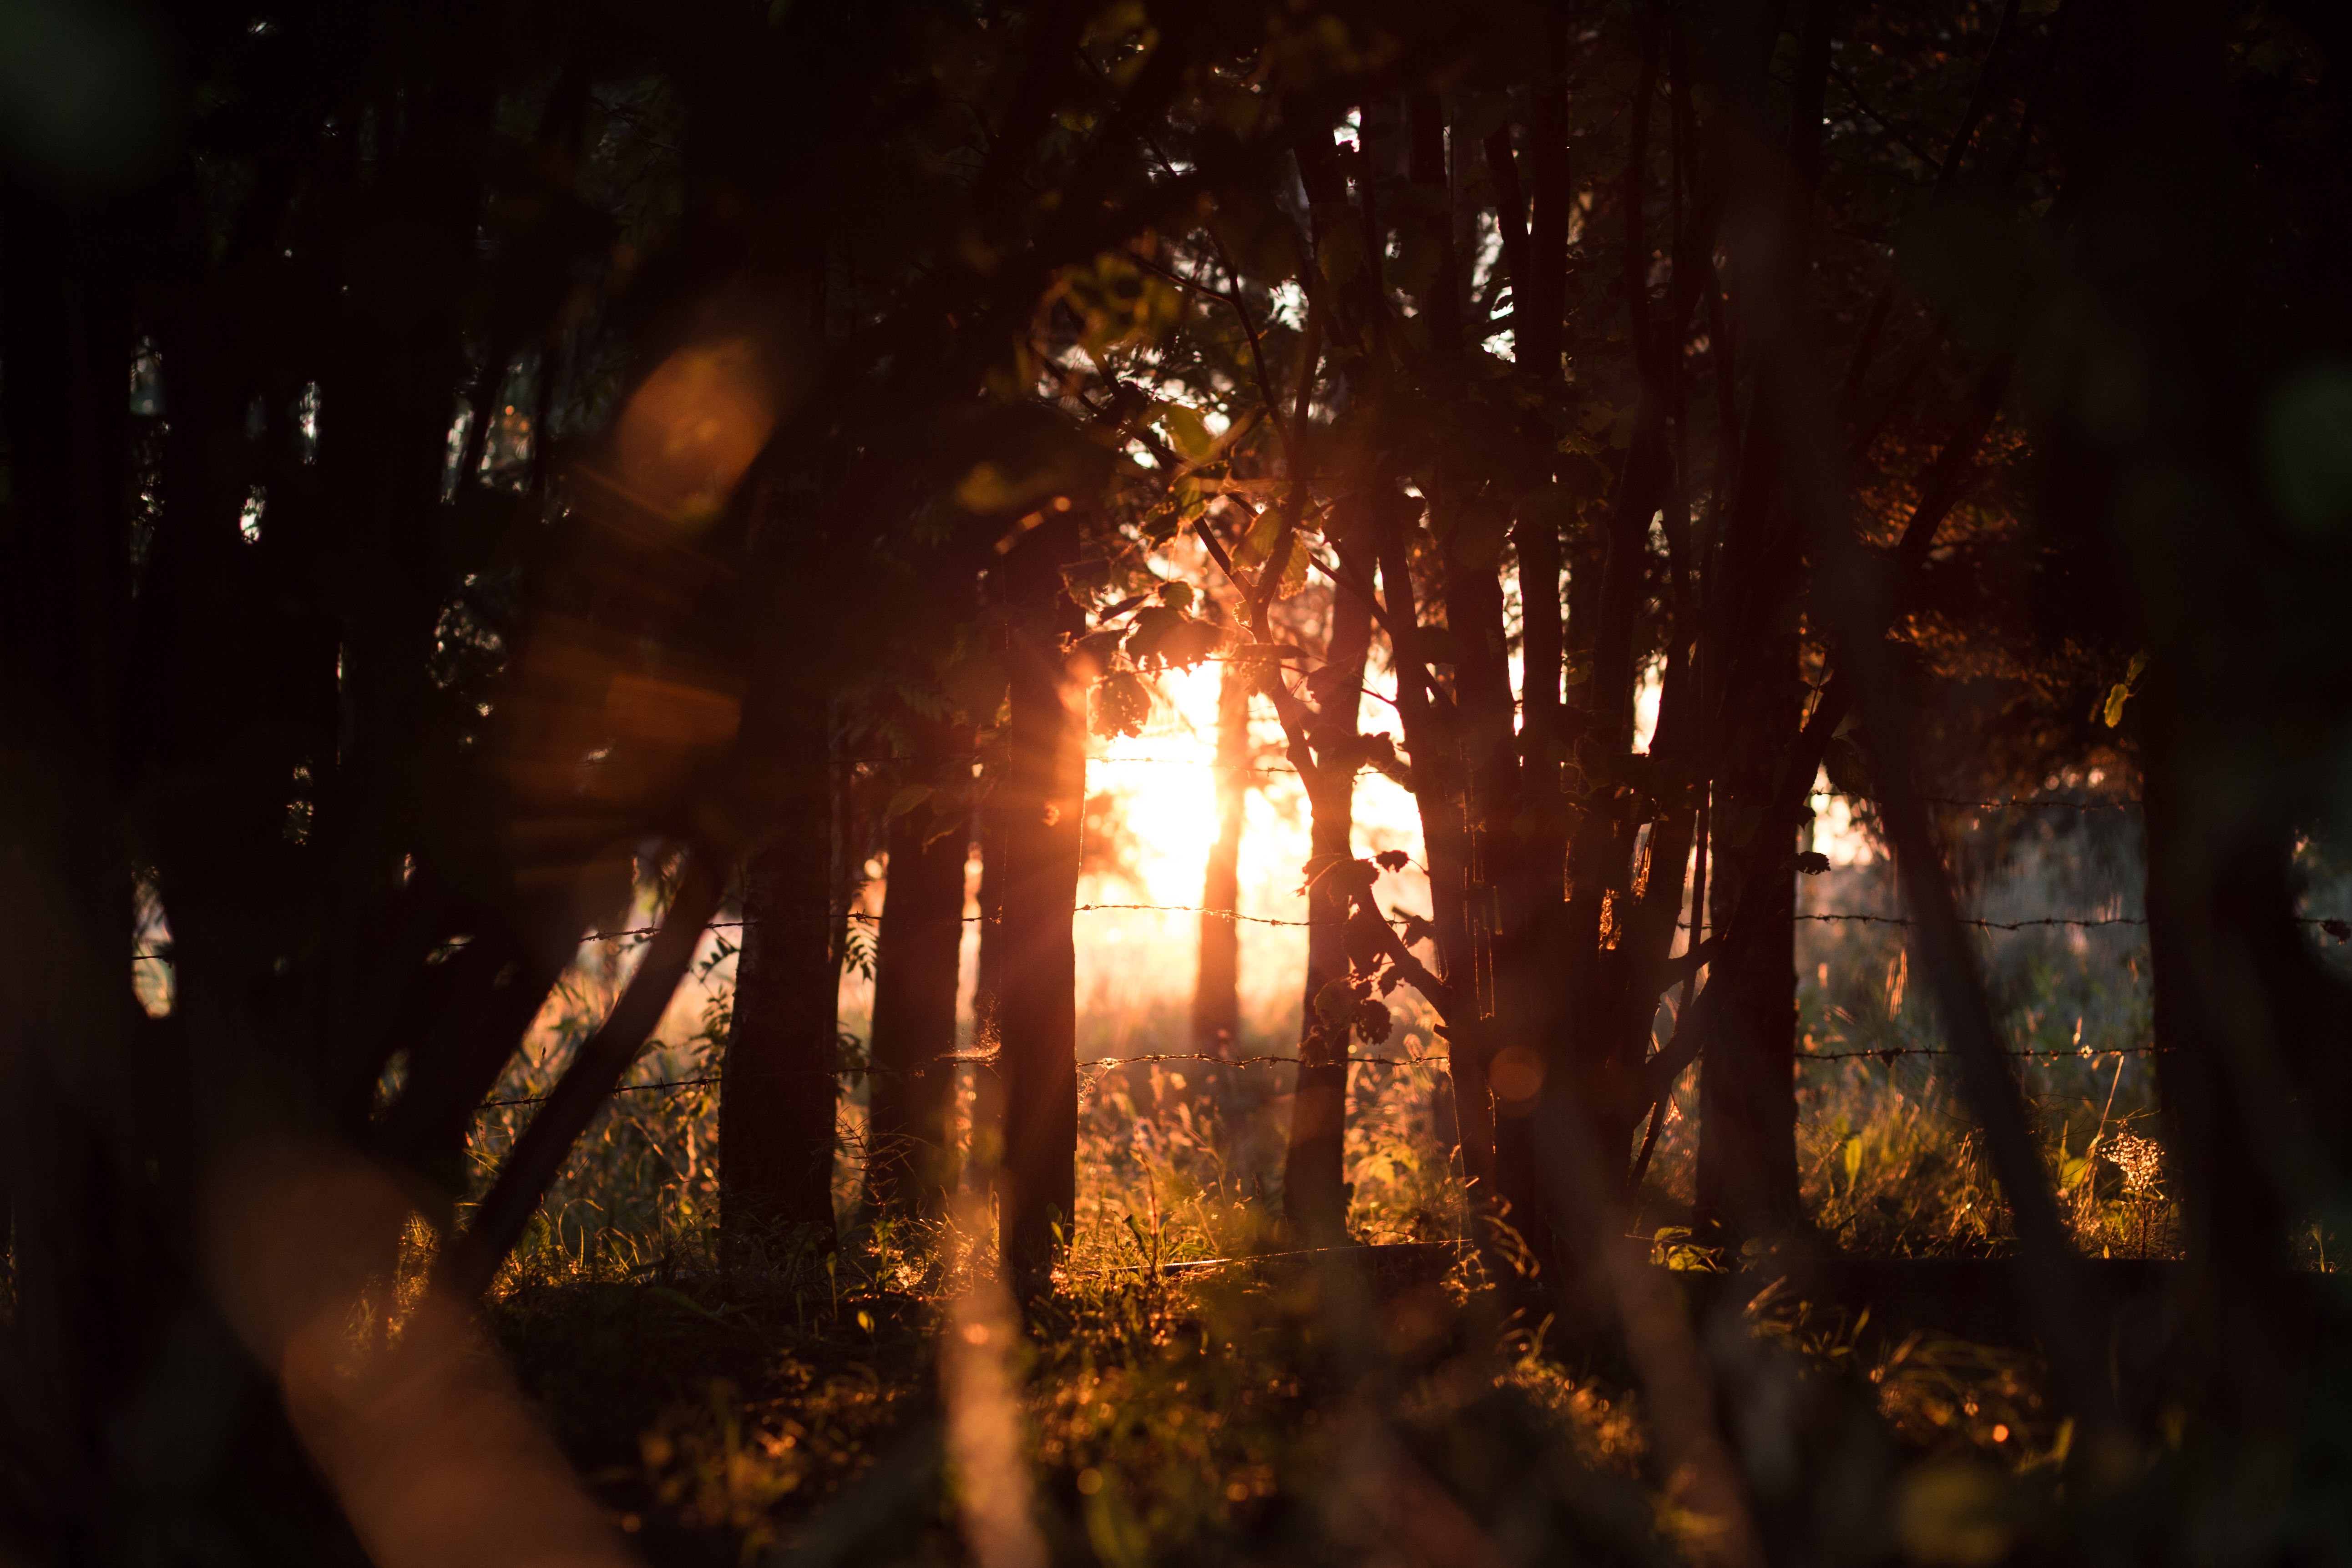 Sunlight Trees Flares Fence Plants Grass 5169x3446